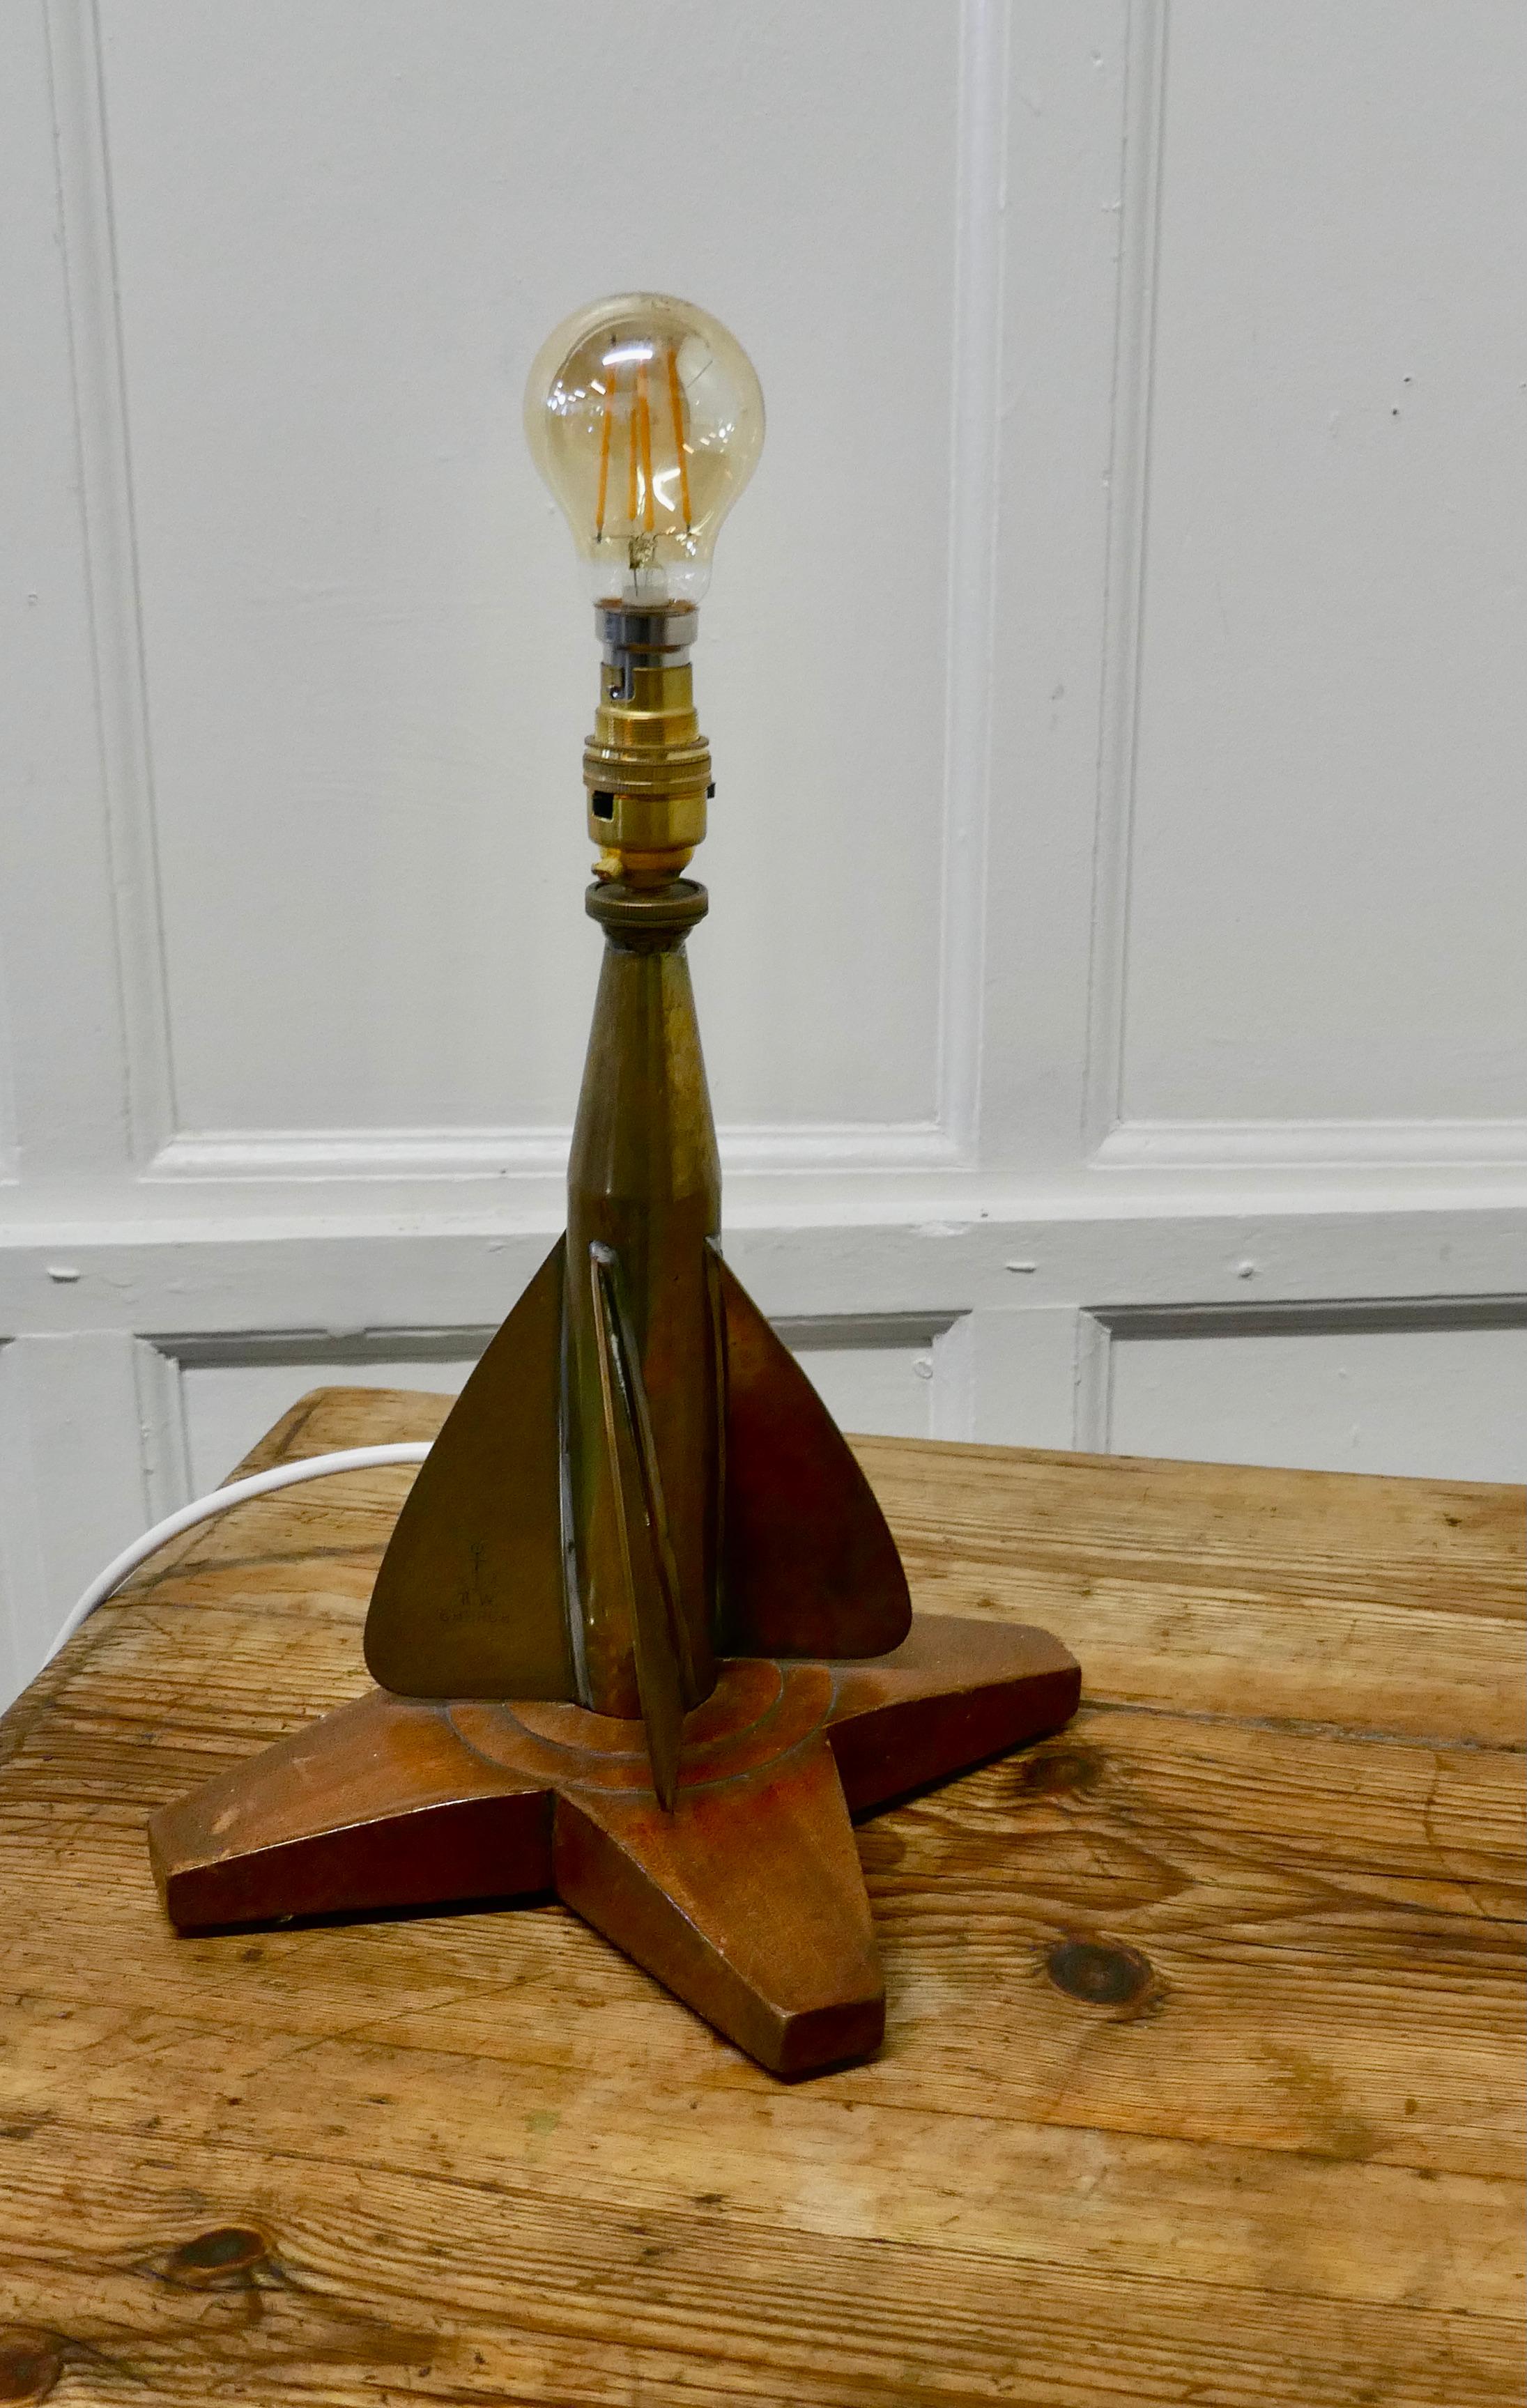 T Walker & Son LTD England Cherub brass Marine log spinner, lamp

Early 20th c log spinner set on a hand made teak base and made into a Lamp some years ago, 
This is a lovely decorative vintage Maritime lamp, engraved by T Walkers with the Cherub